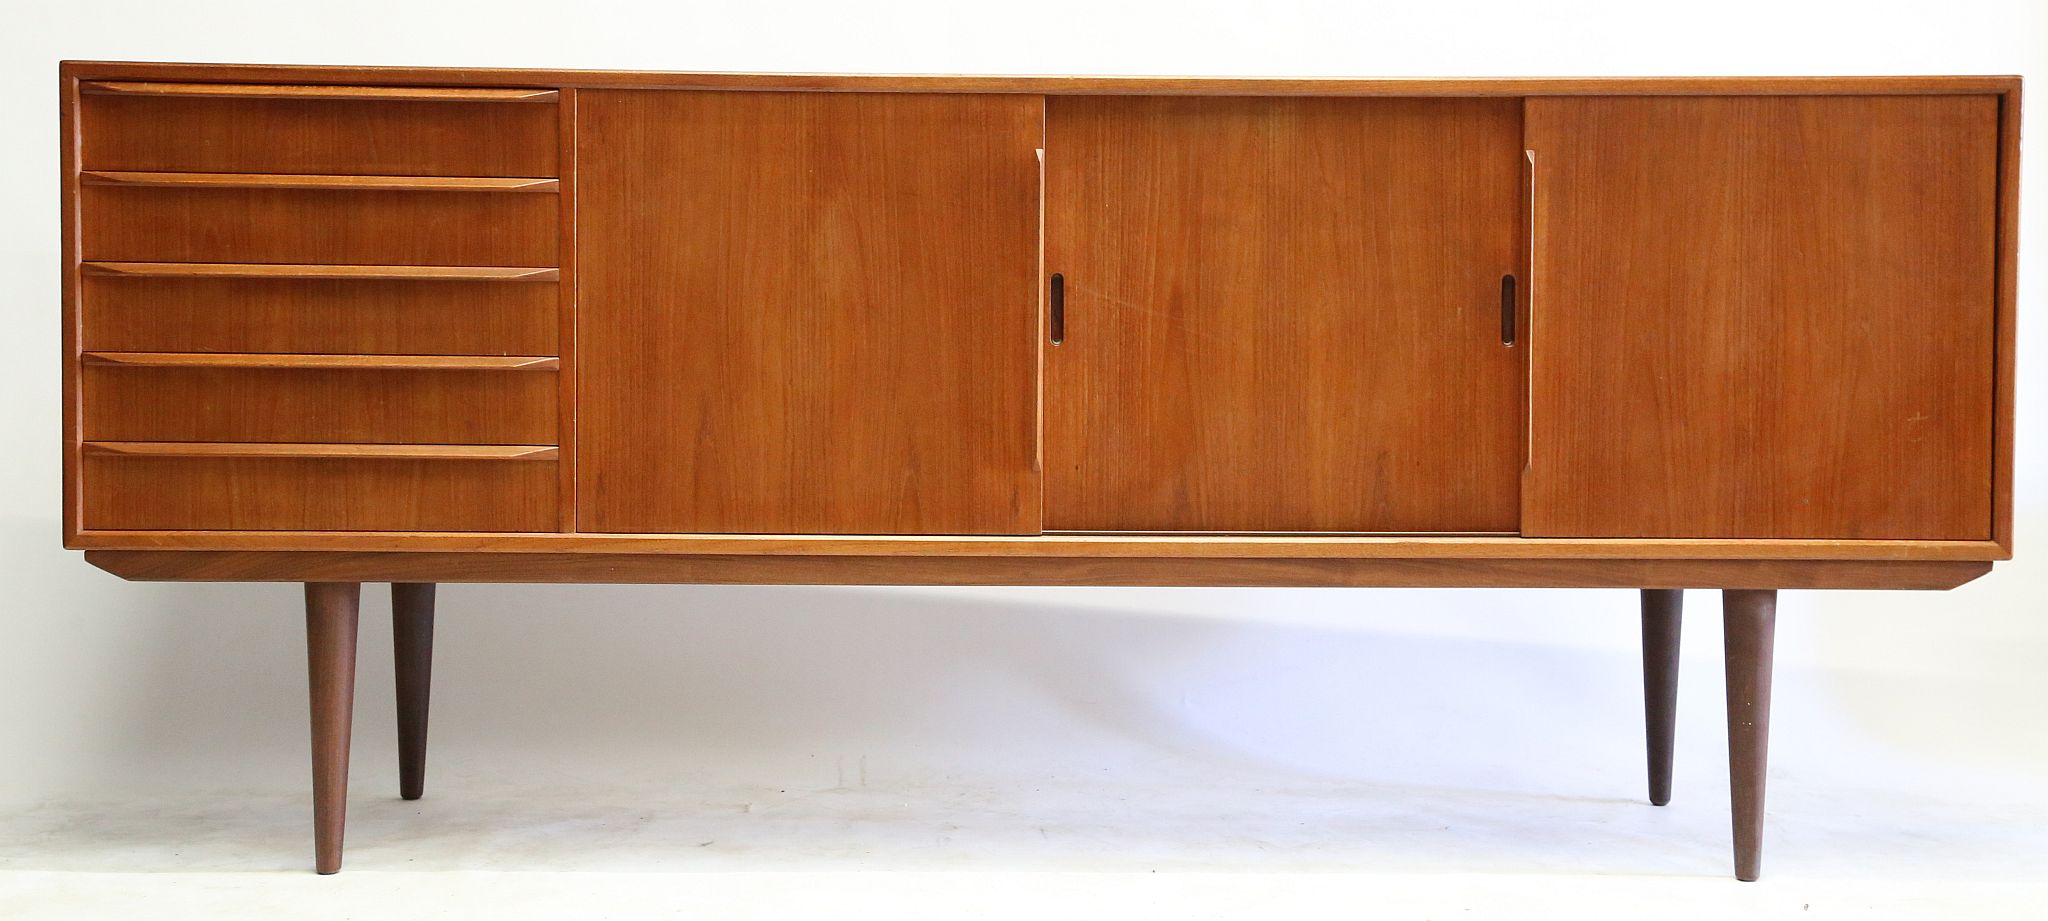 A DANISH 1960s TEAK SIDEBOARD, attributed to Svend - Image 9 of 10